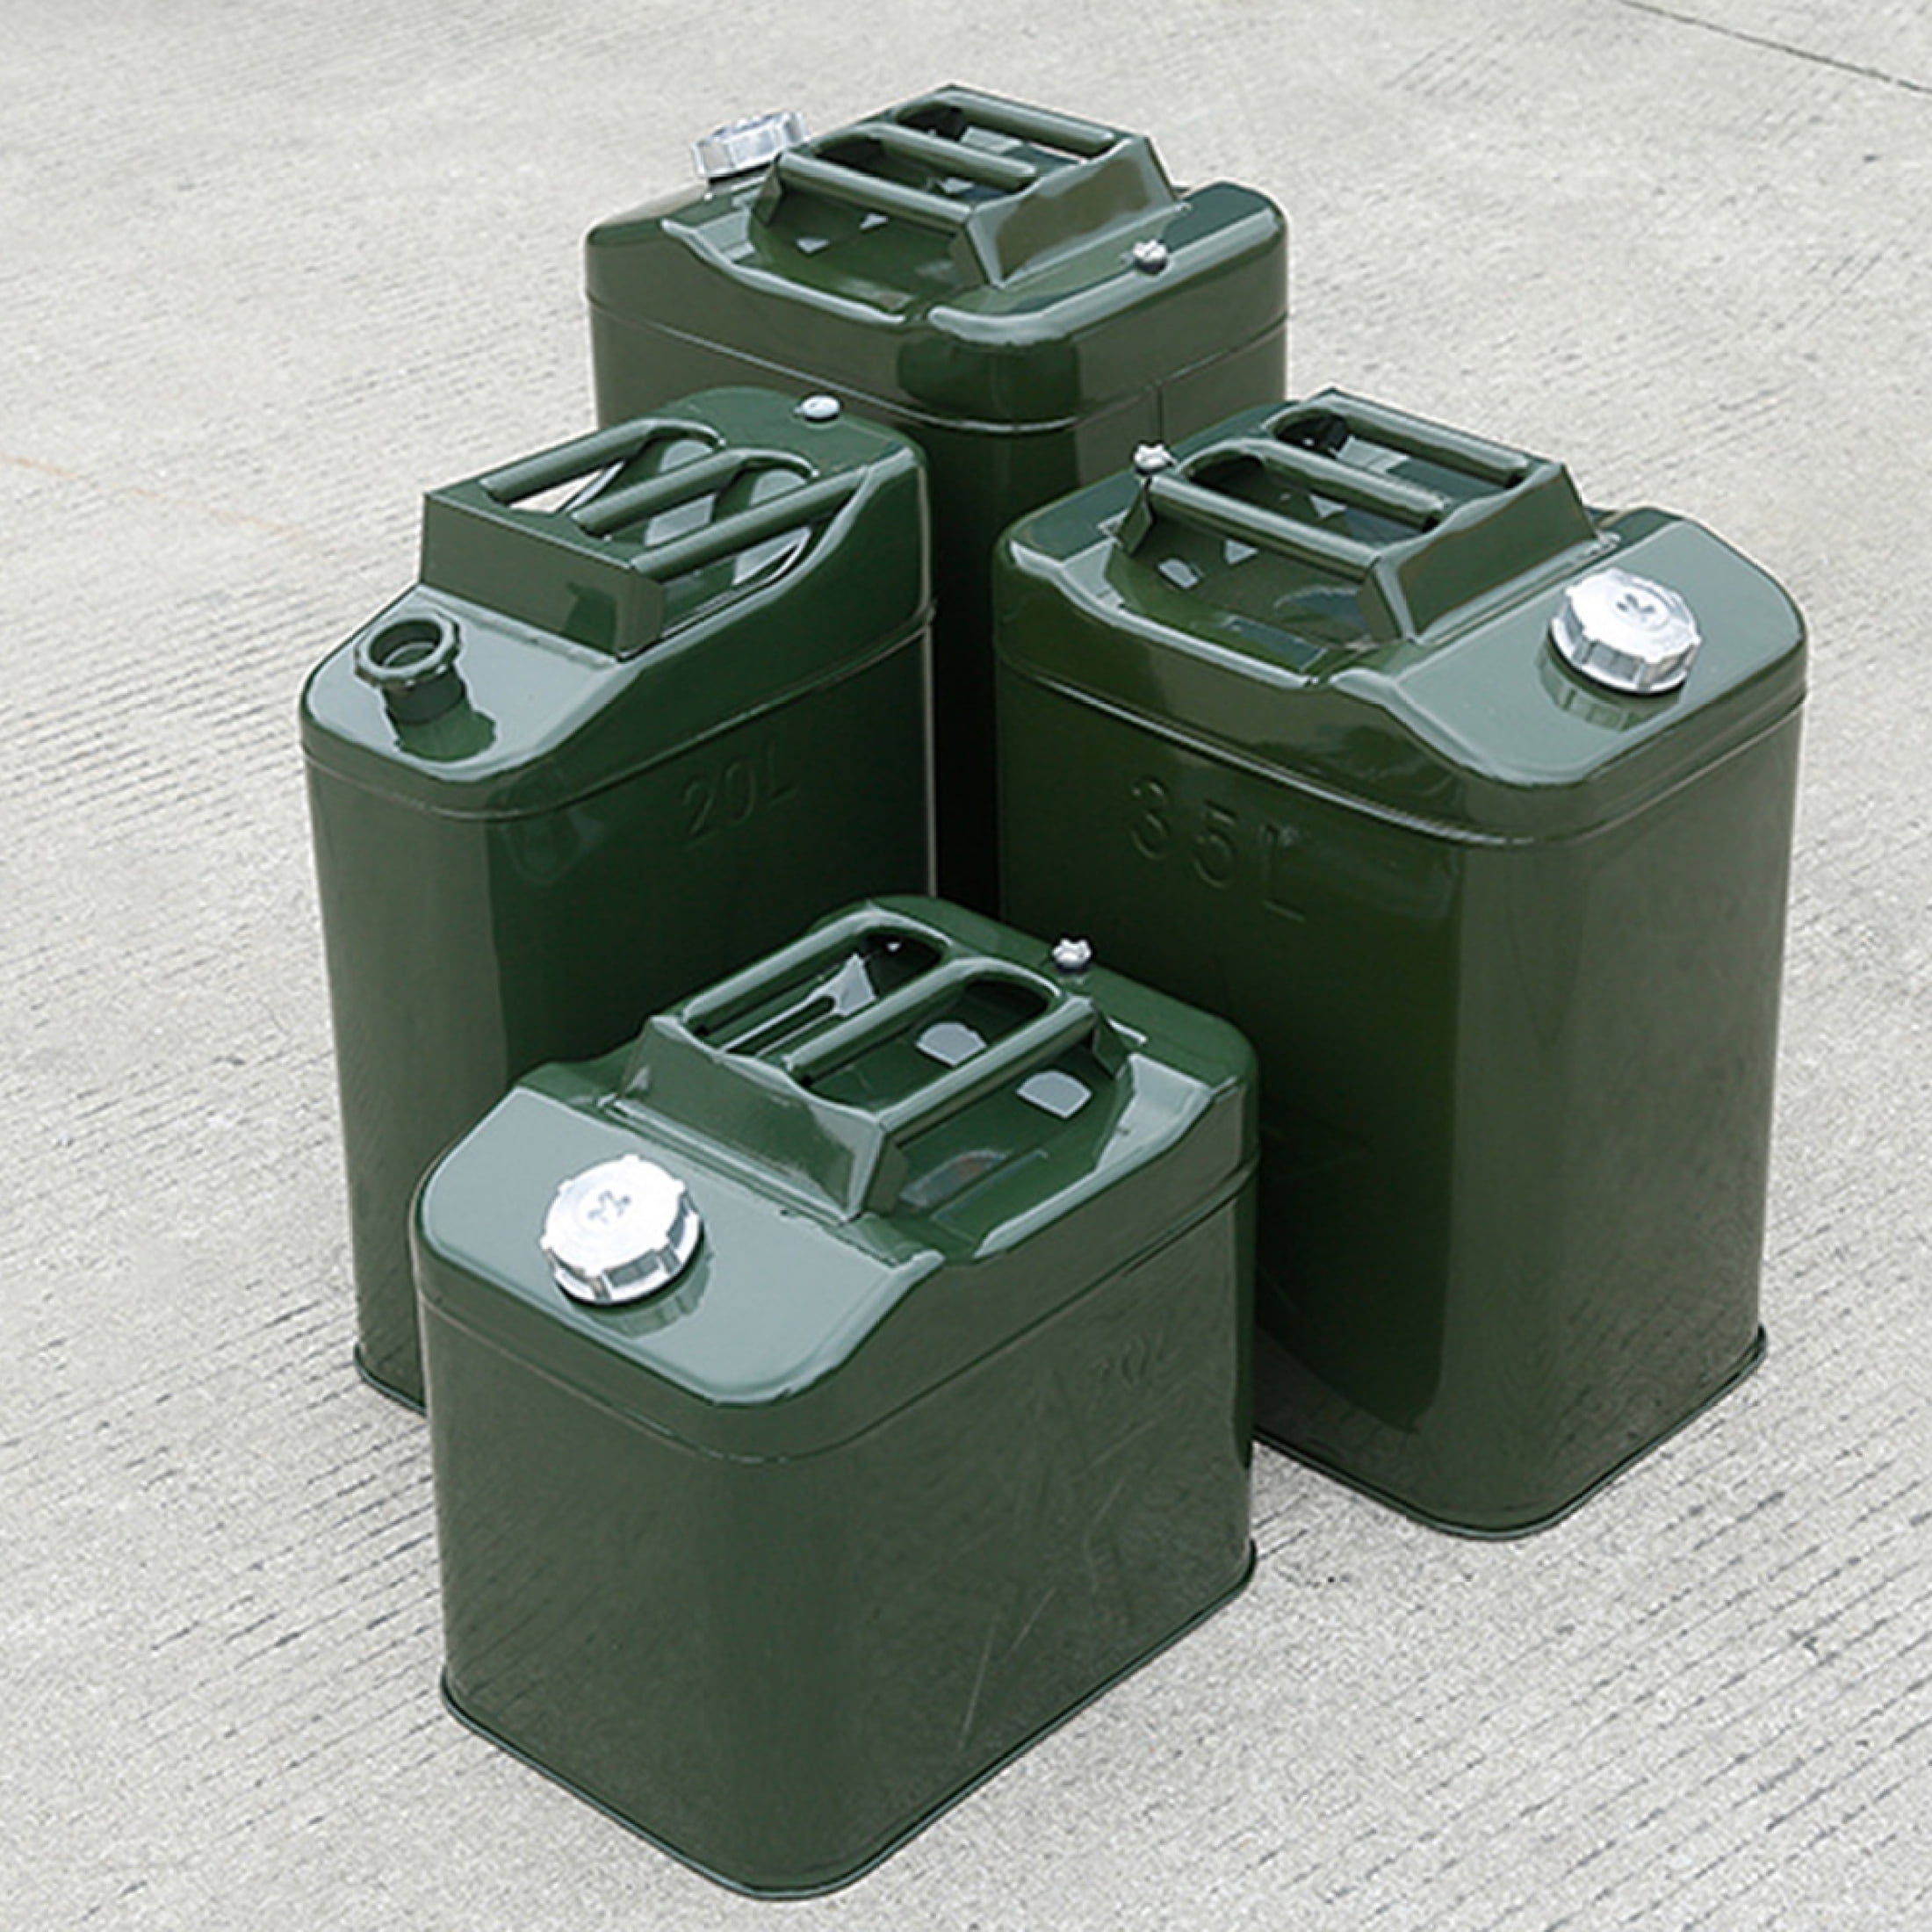 10l fuel canister Hünersdorff (9565 1000) - merXu - Negotiate prices!  Wholesale purchases!